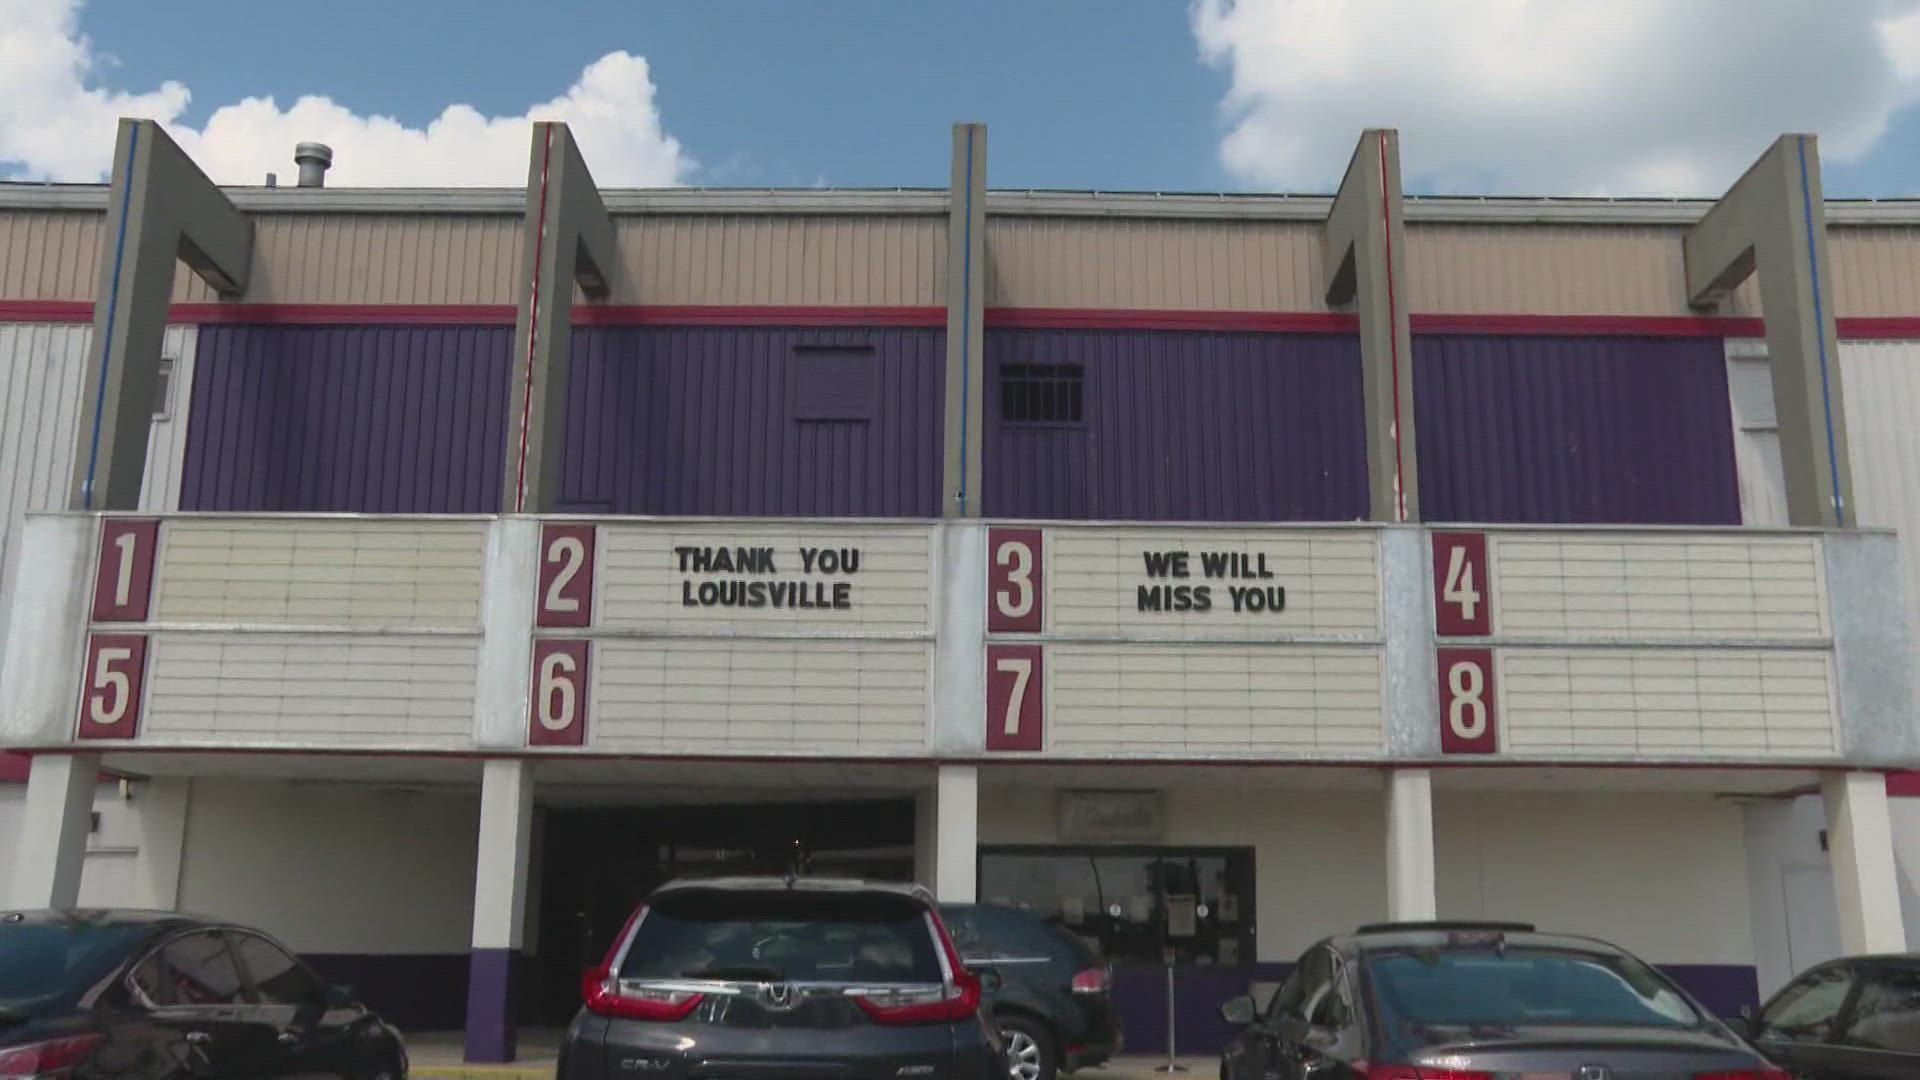 The locally-owned Louisville movie theater dimmed its lights and closed its doors.